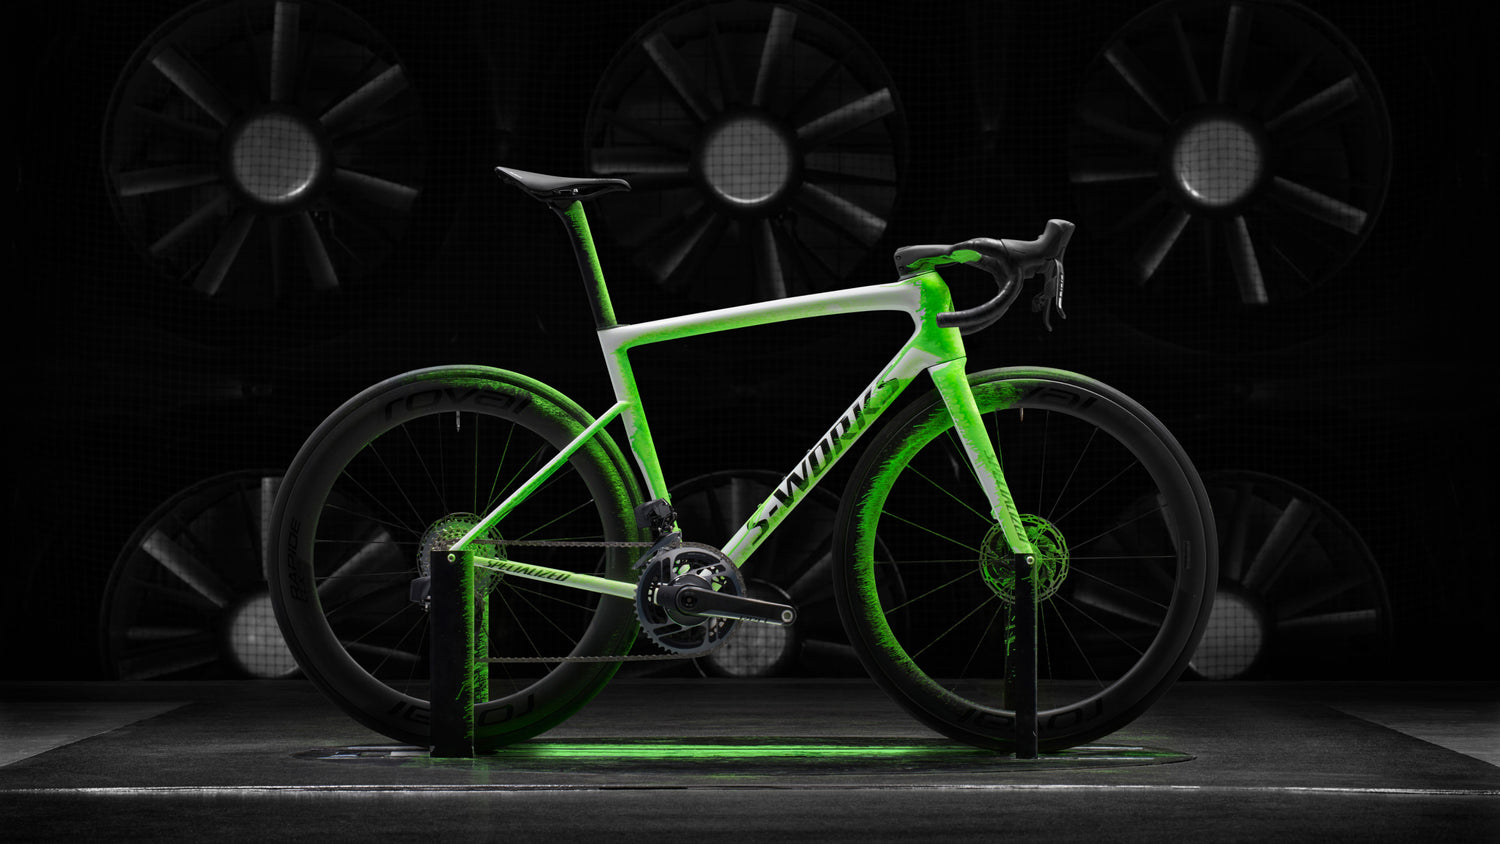 Specialized S-Works Tarmac SL8 in wind tunnel - paint analysis